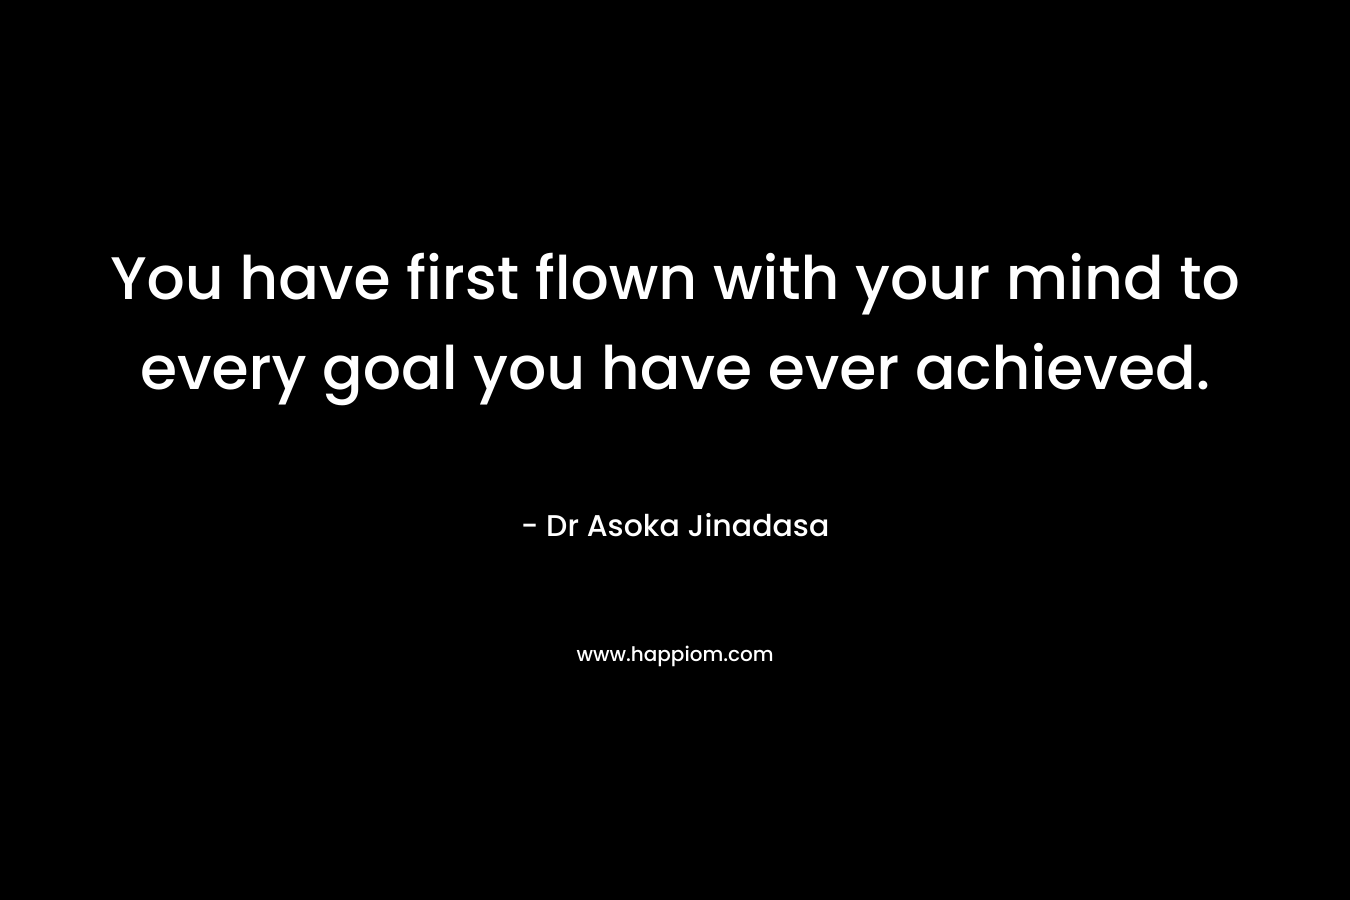 You have first flown with your mind to every goal you have ever achieved.